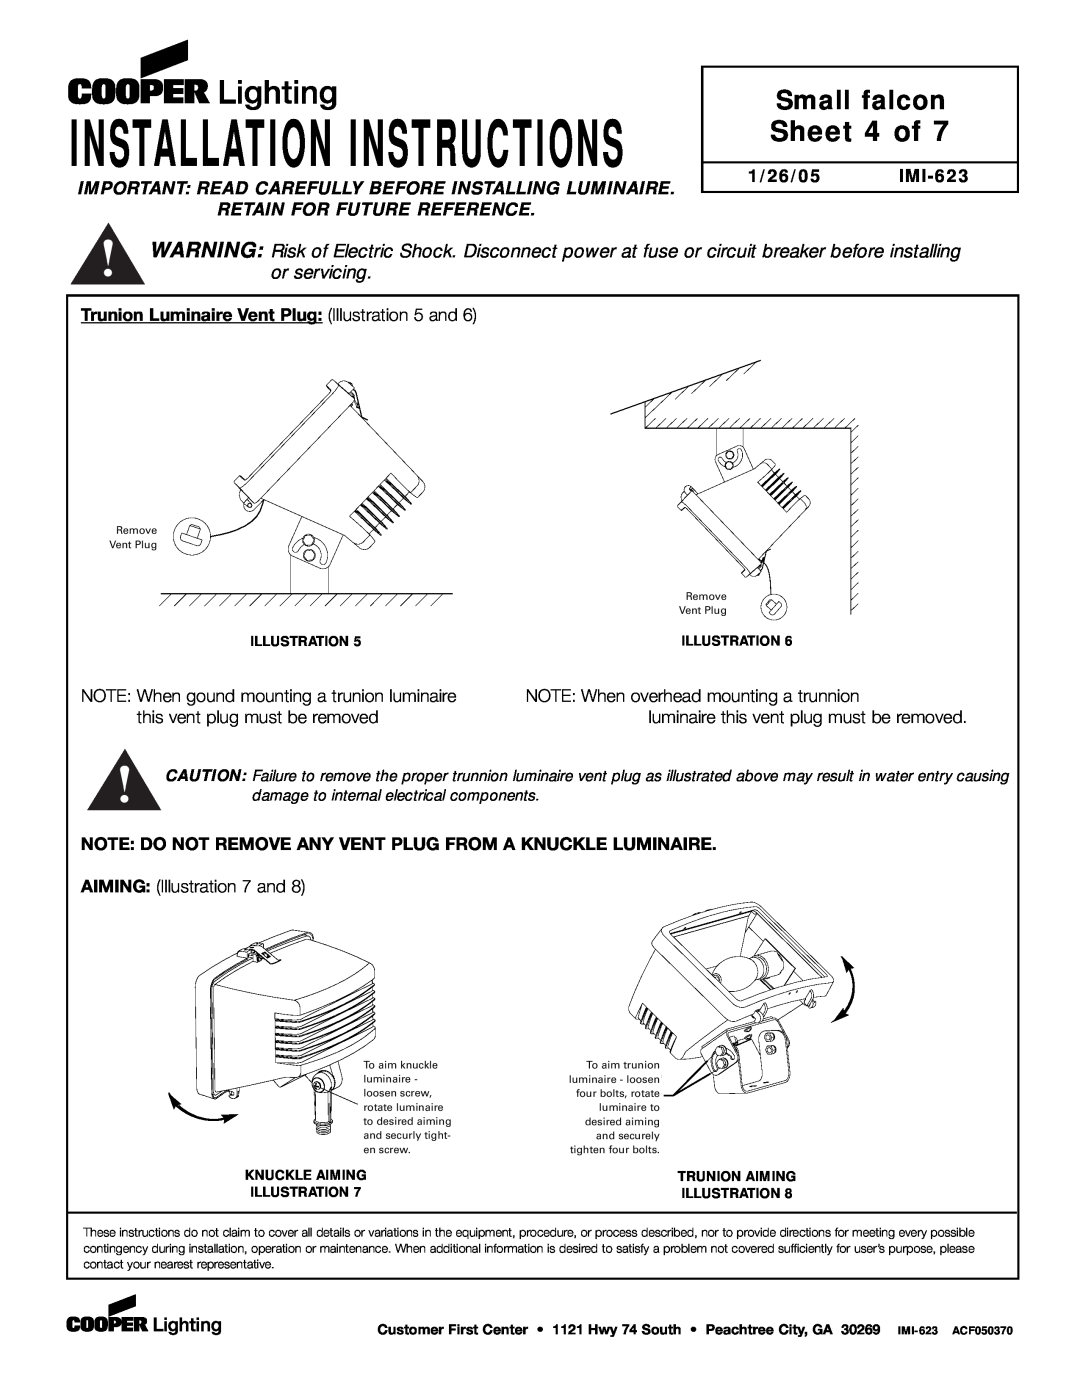 Cooper Lighting P4GE-MX Sheet 4 of, Trunion Luminaire Vent Plug Illustration 5 and, Installation Instructions 